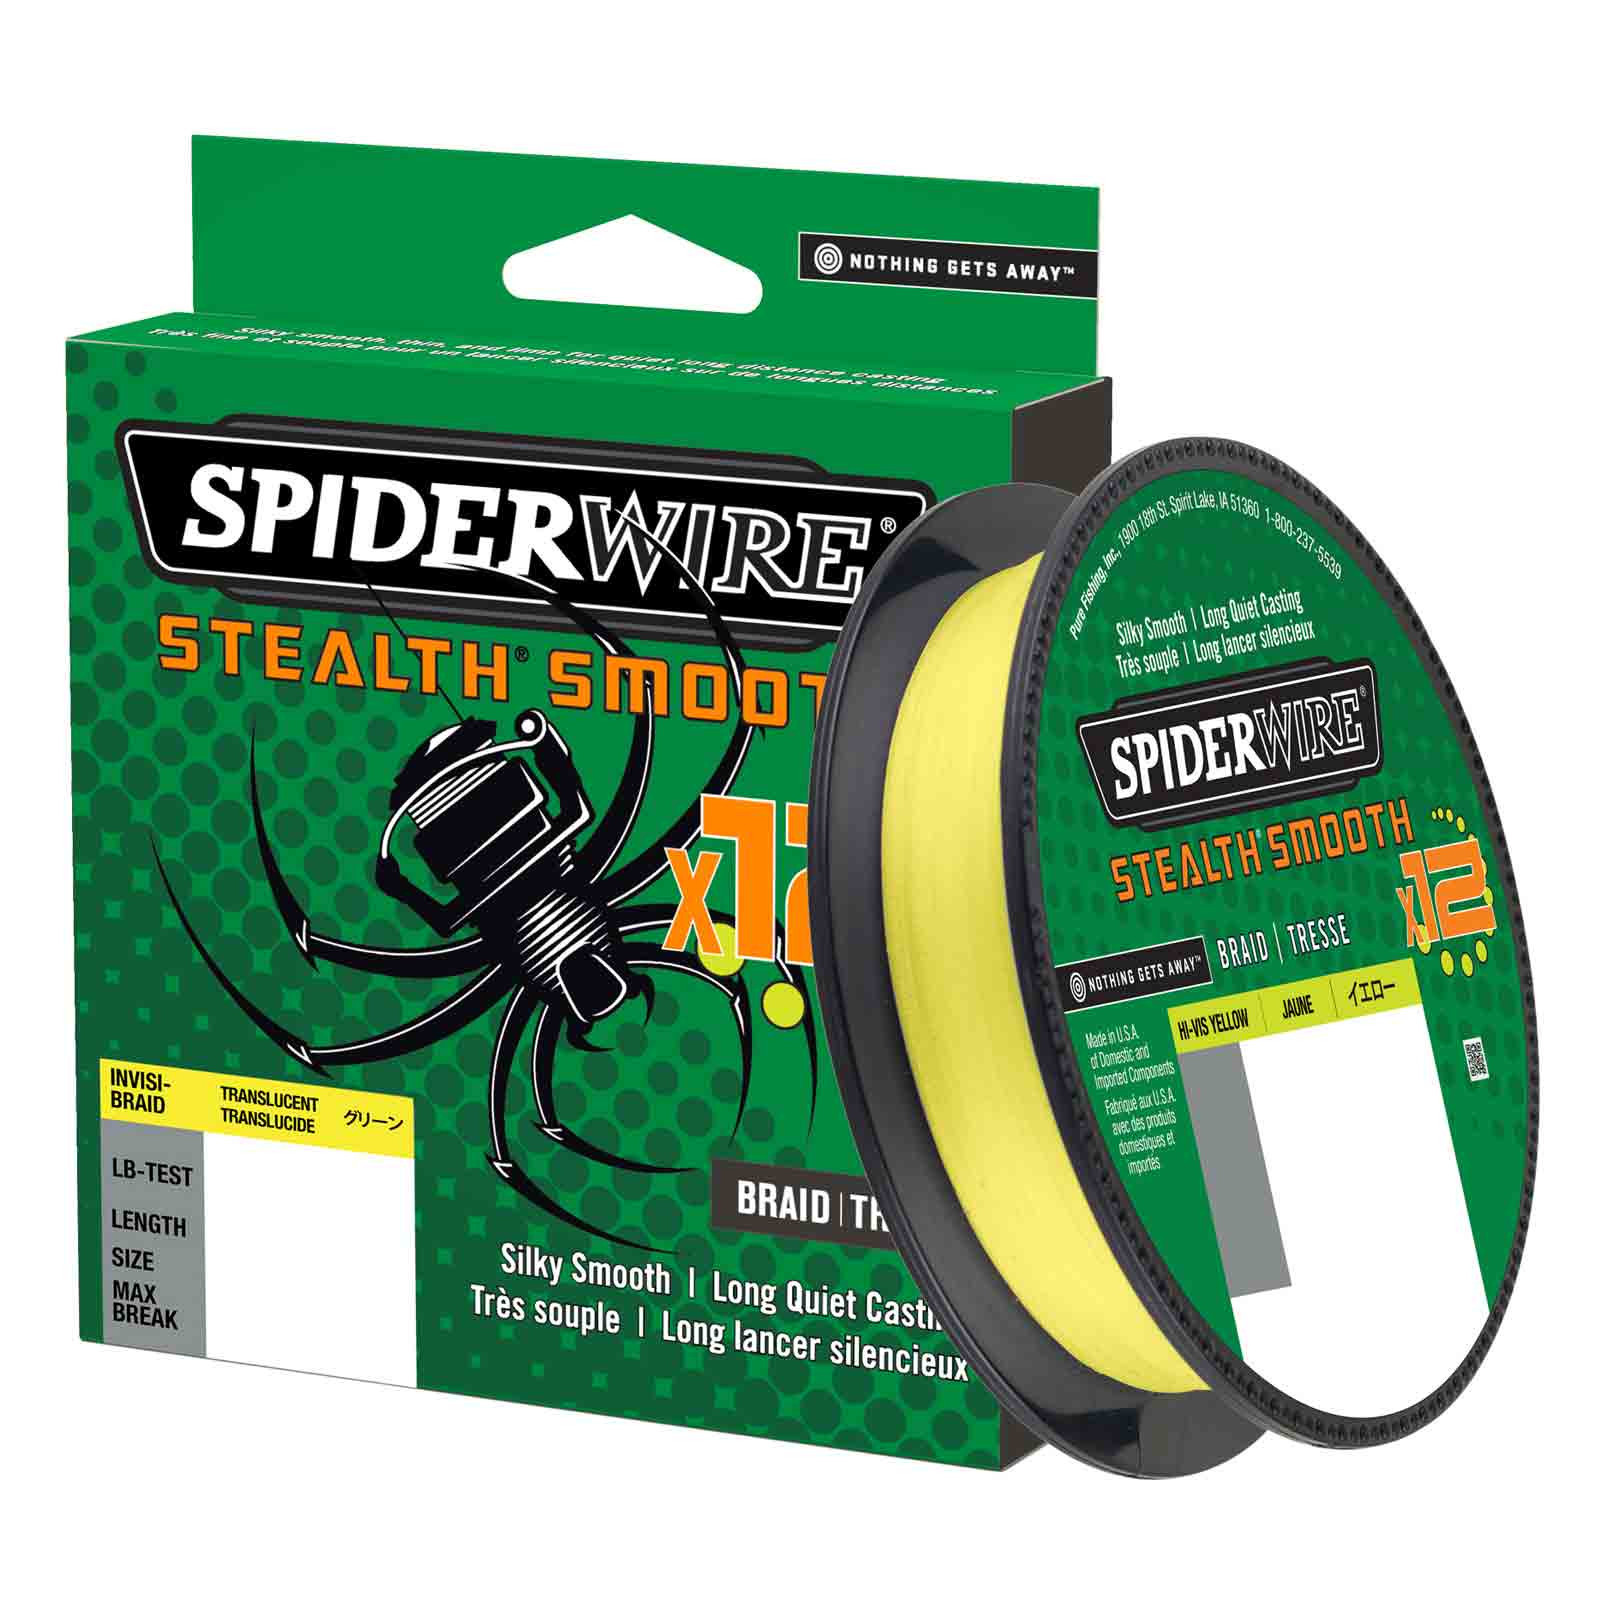 Spiderwire Stealth Smooth 12 0.29 Hi-Vis Yellow